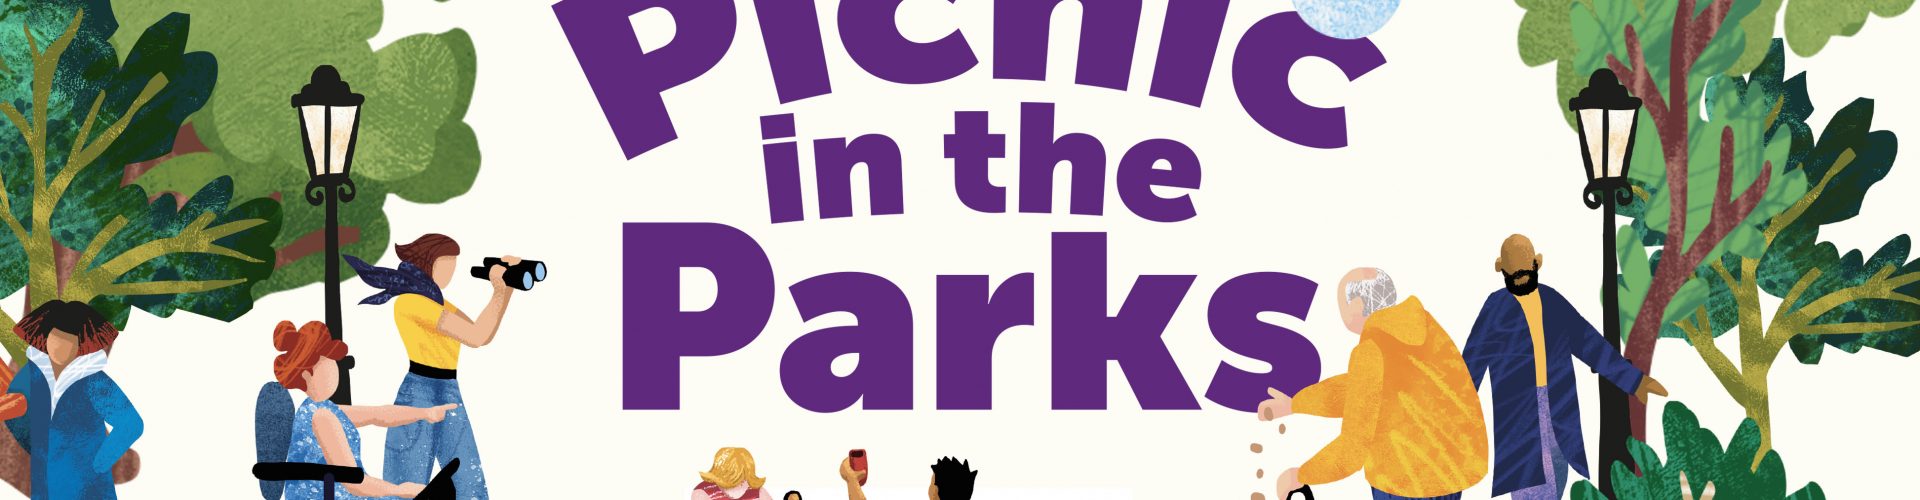 Picnic in the Parks header